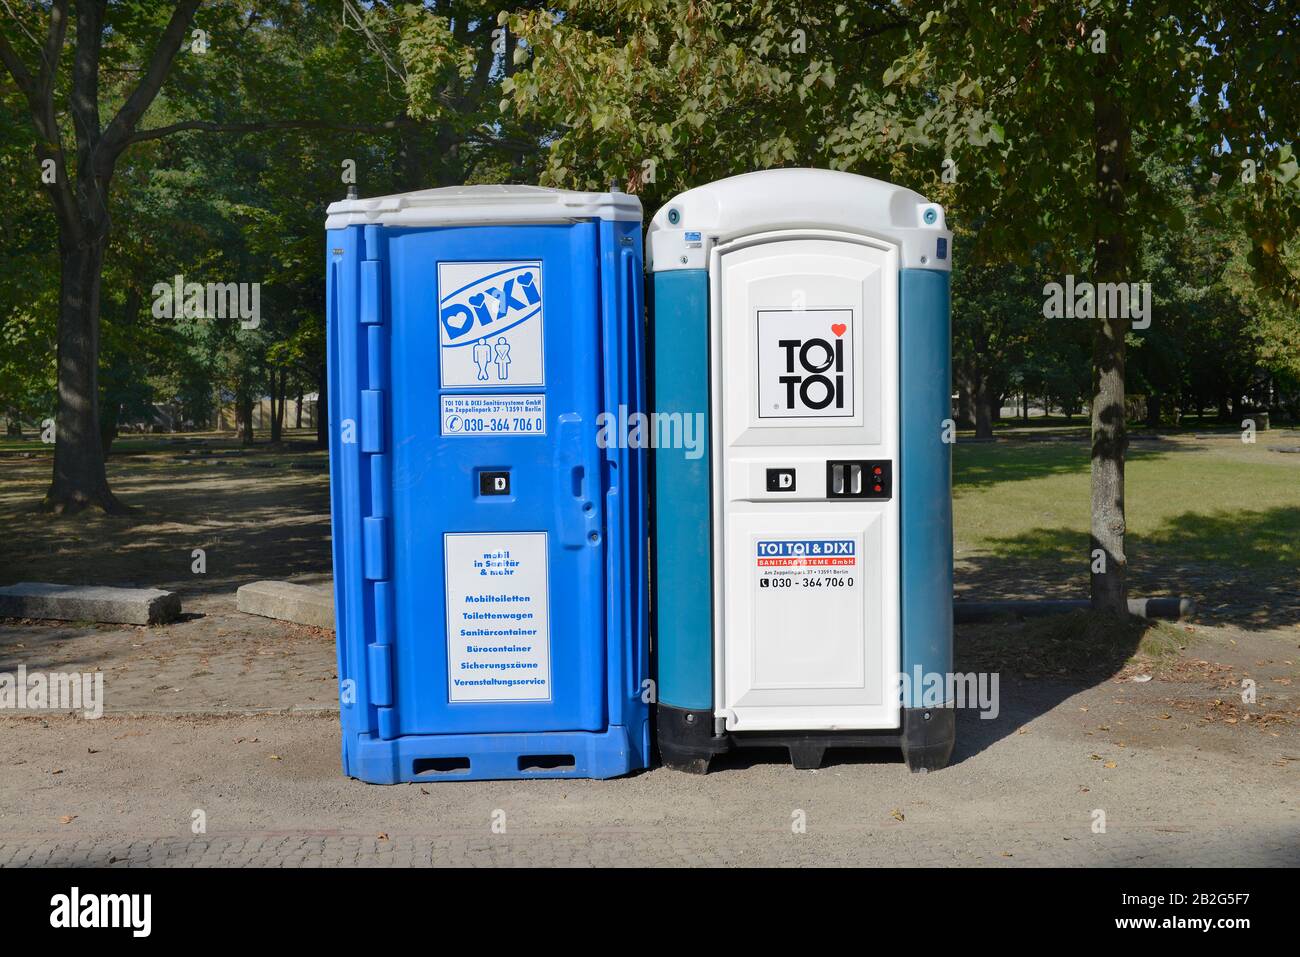 Dixi Toiletten High Resolution Stock Photography and Images - Alamy